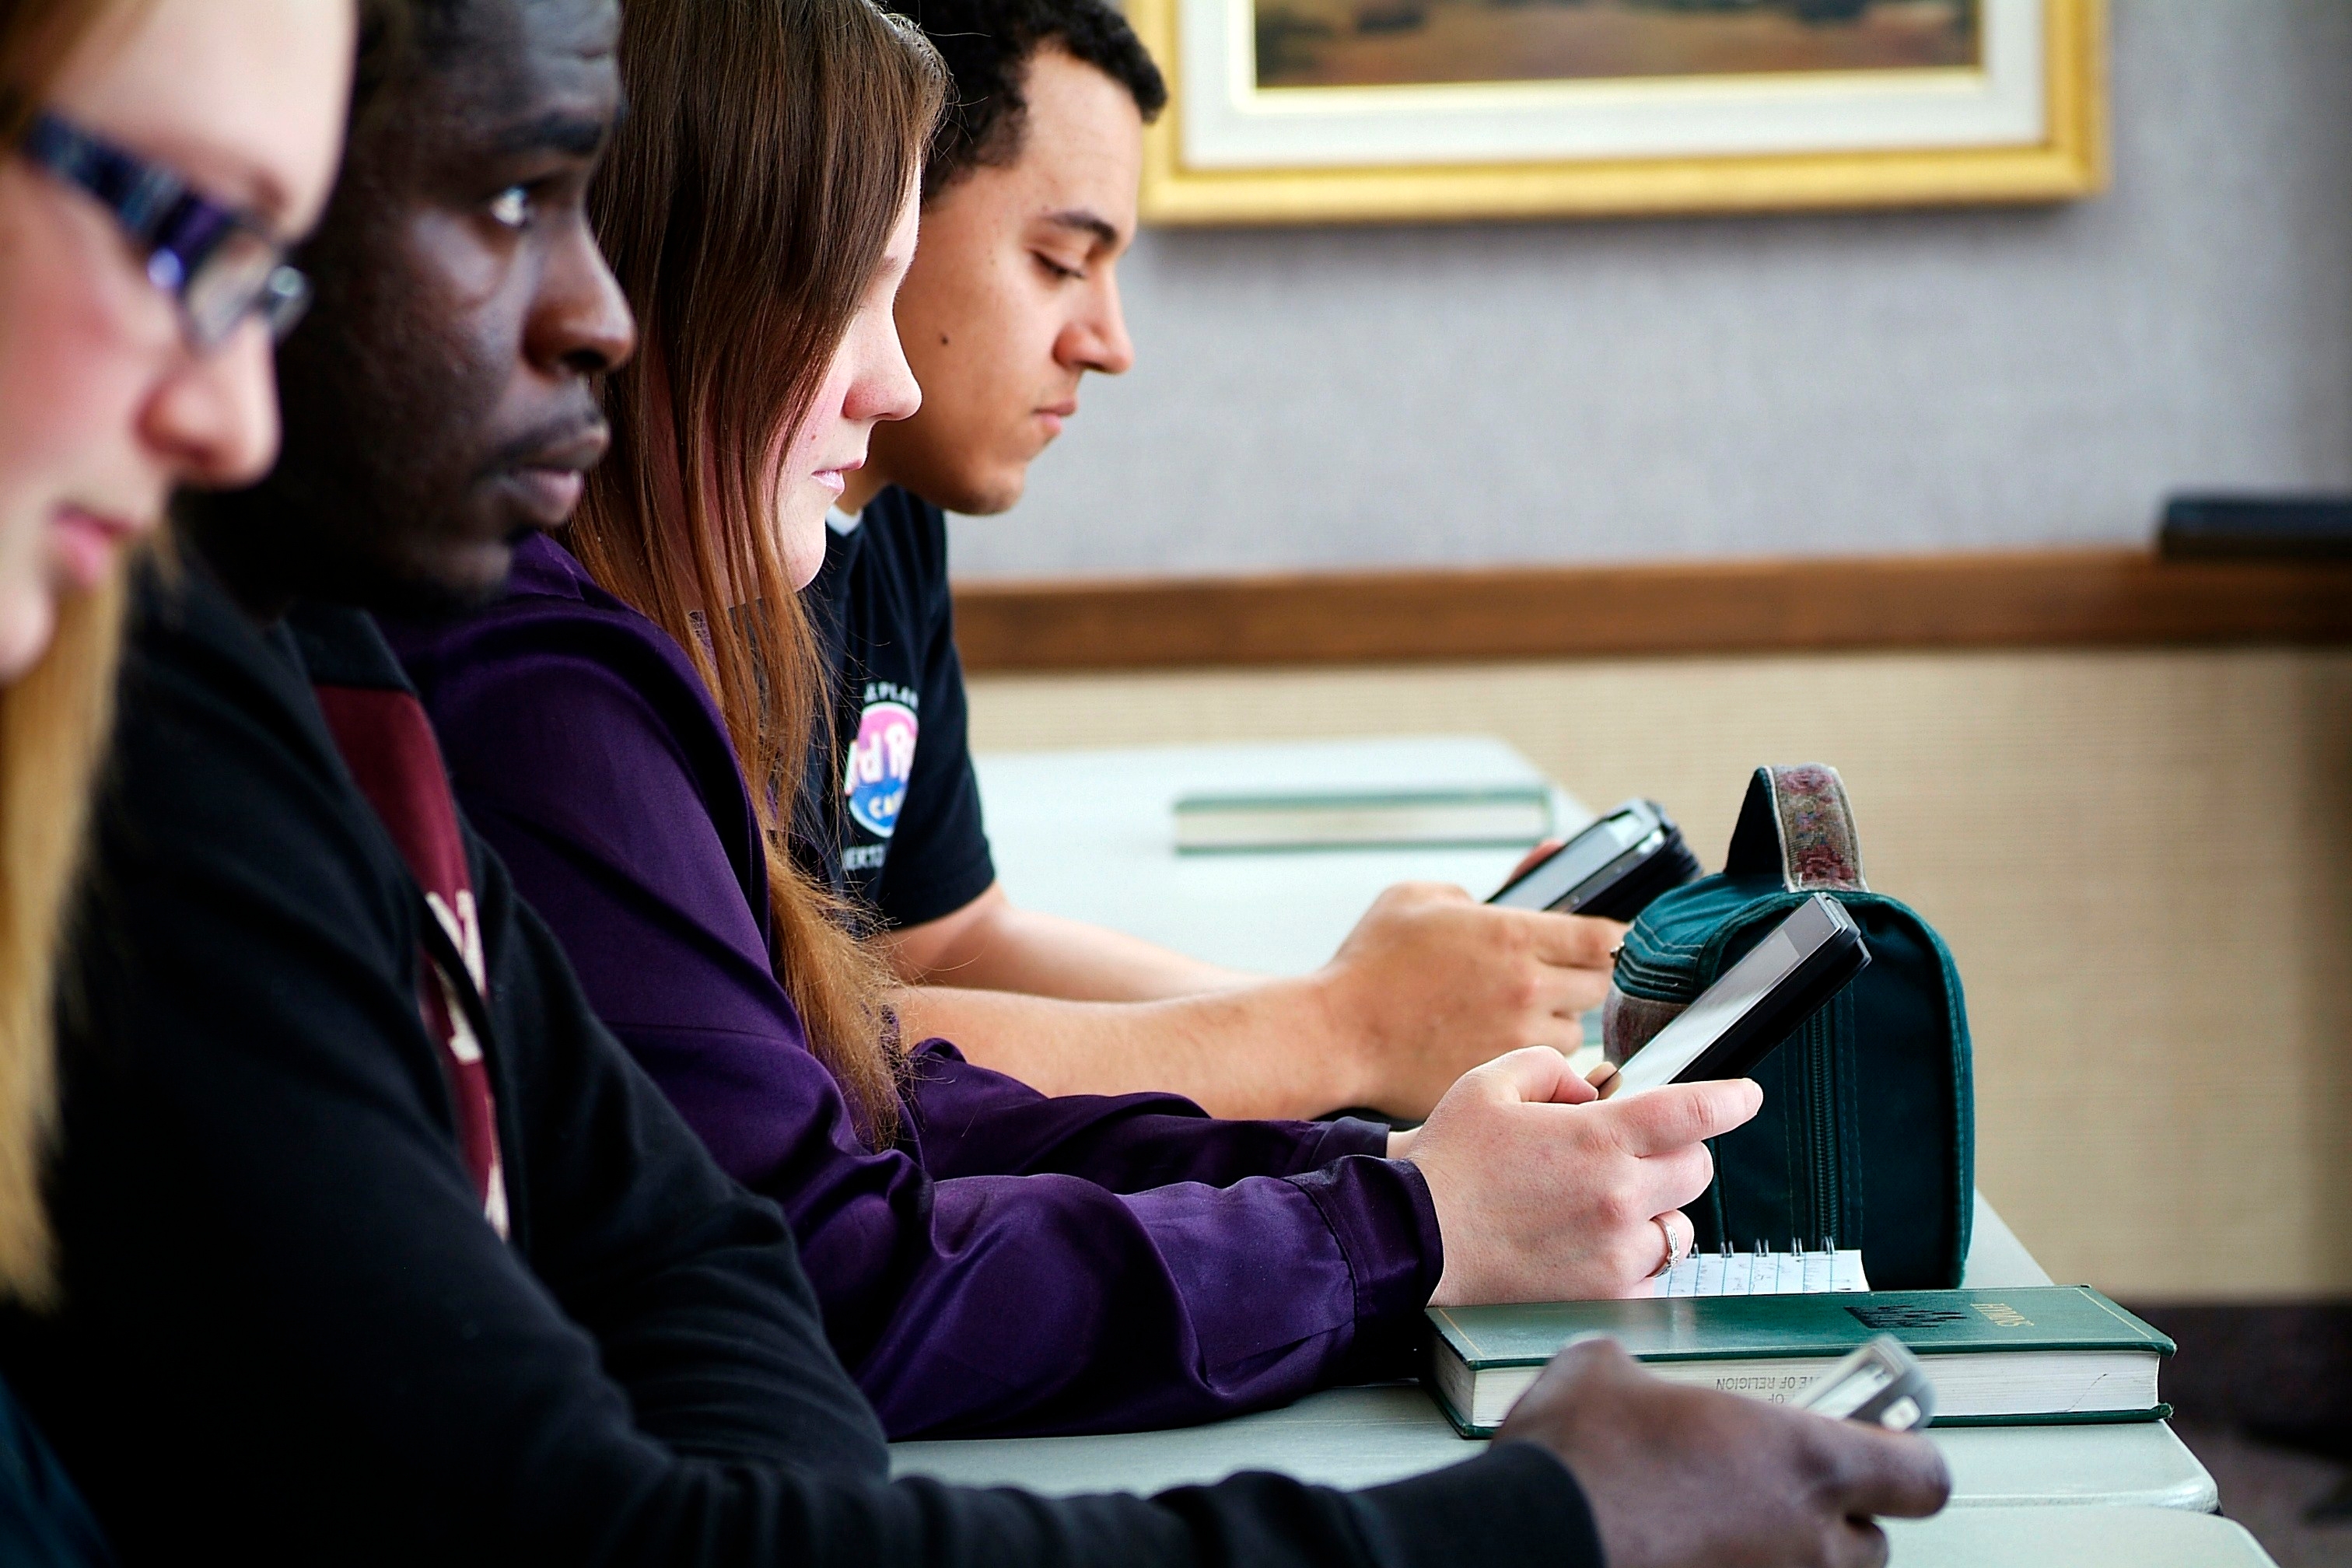 A group of teenagers look at their smartphones while sitting at a table in seminary.